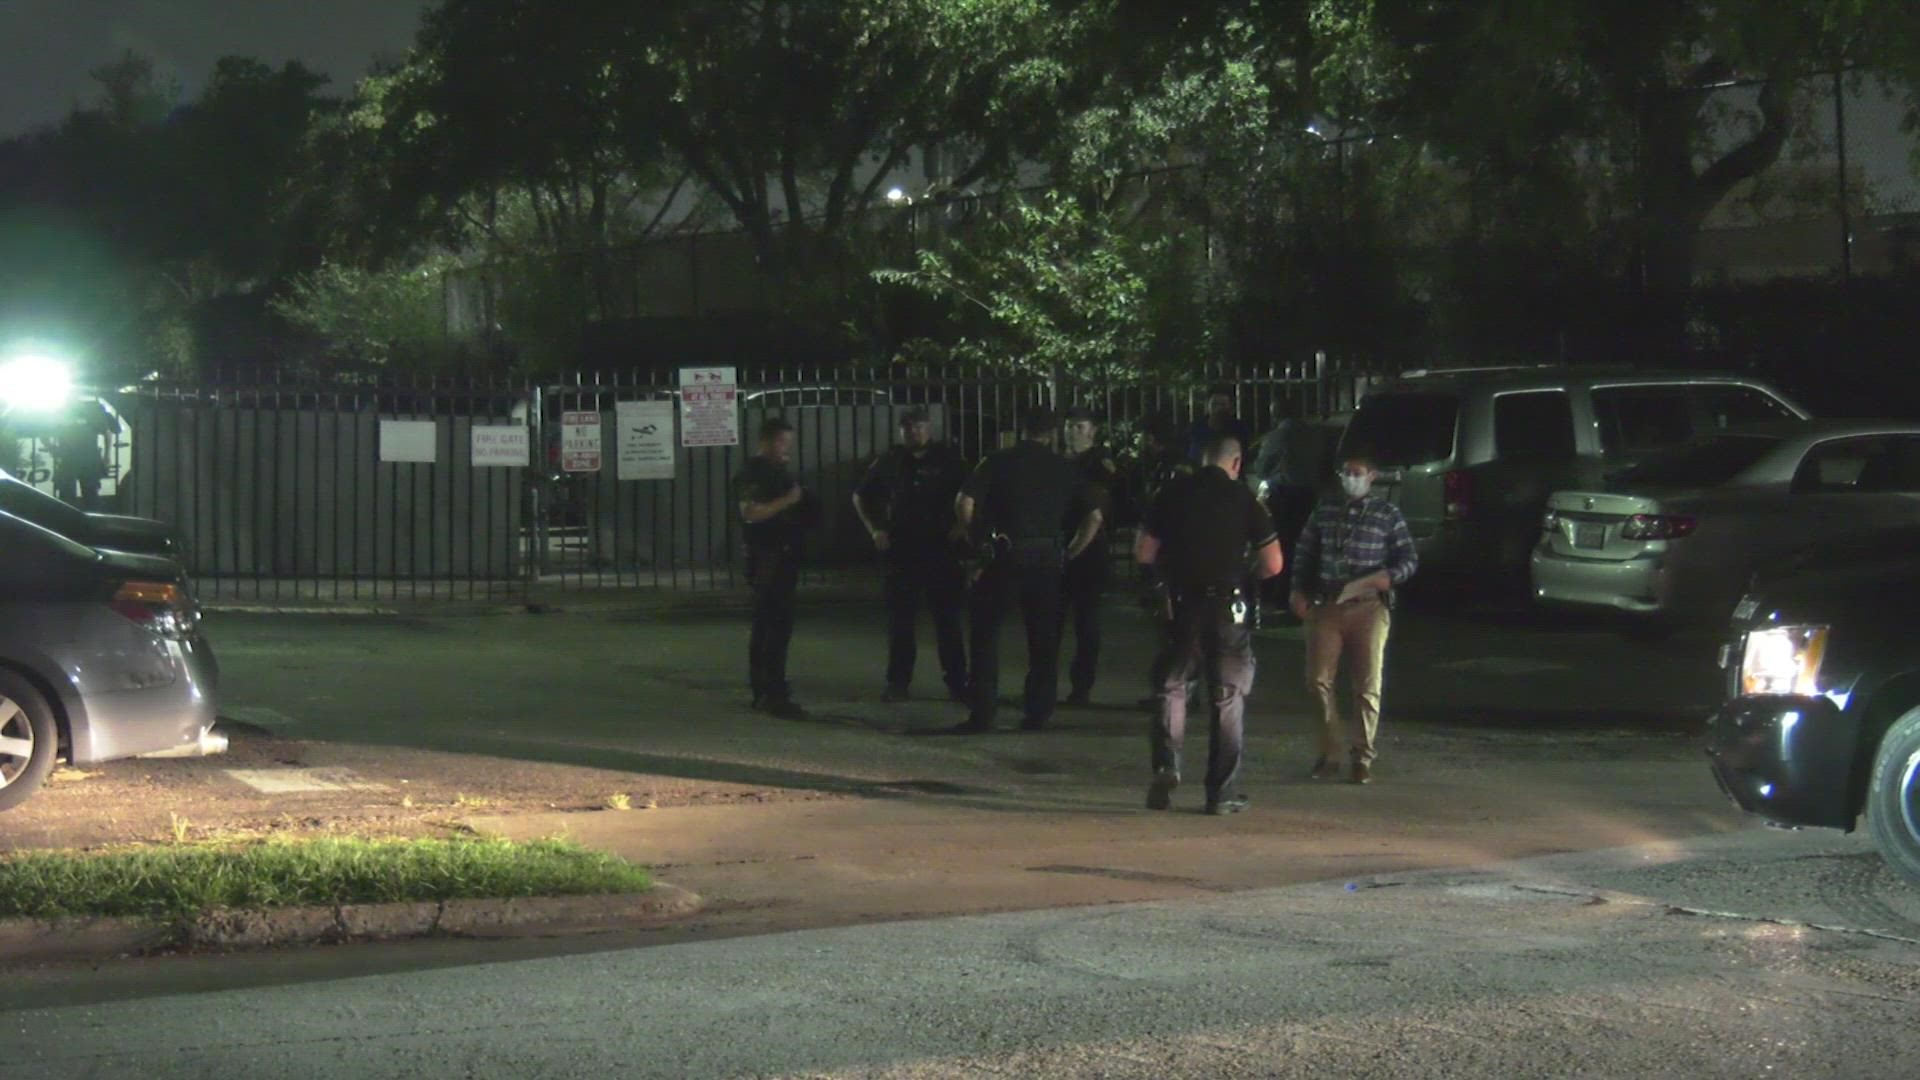 Family members told police the victim accidentally shot herself in the stomach at an apartment in the Sharpstown area.